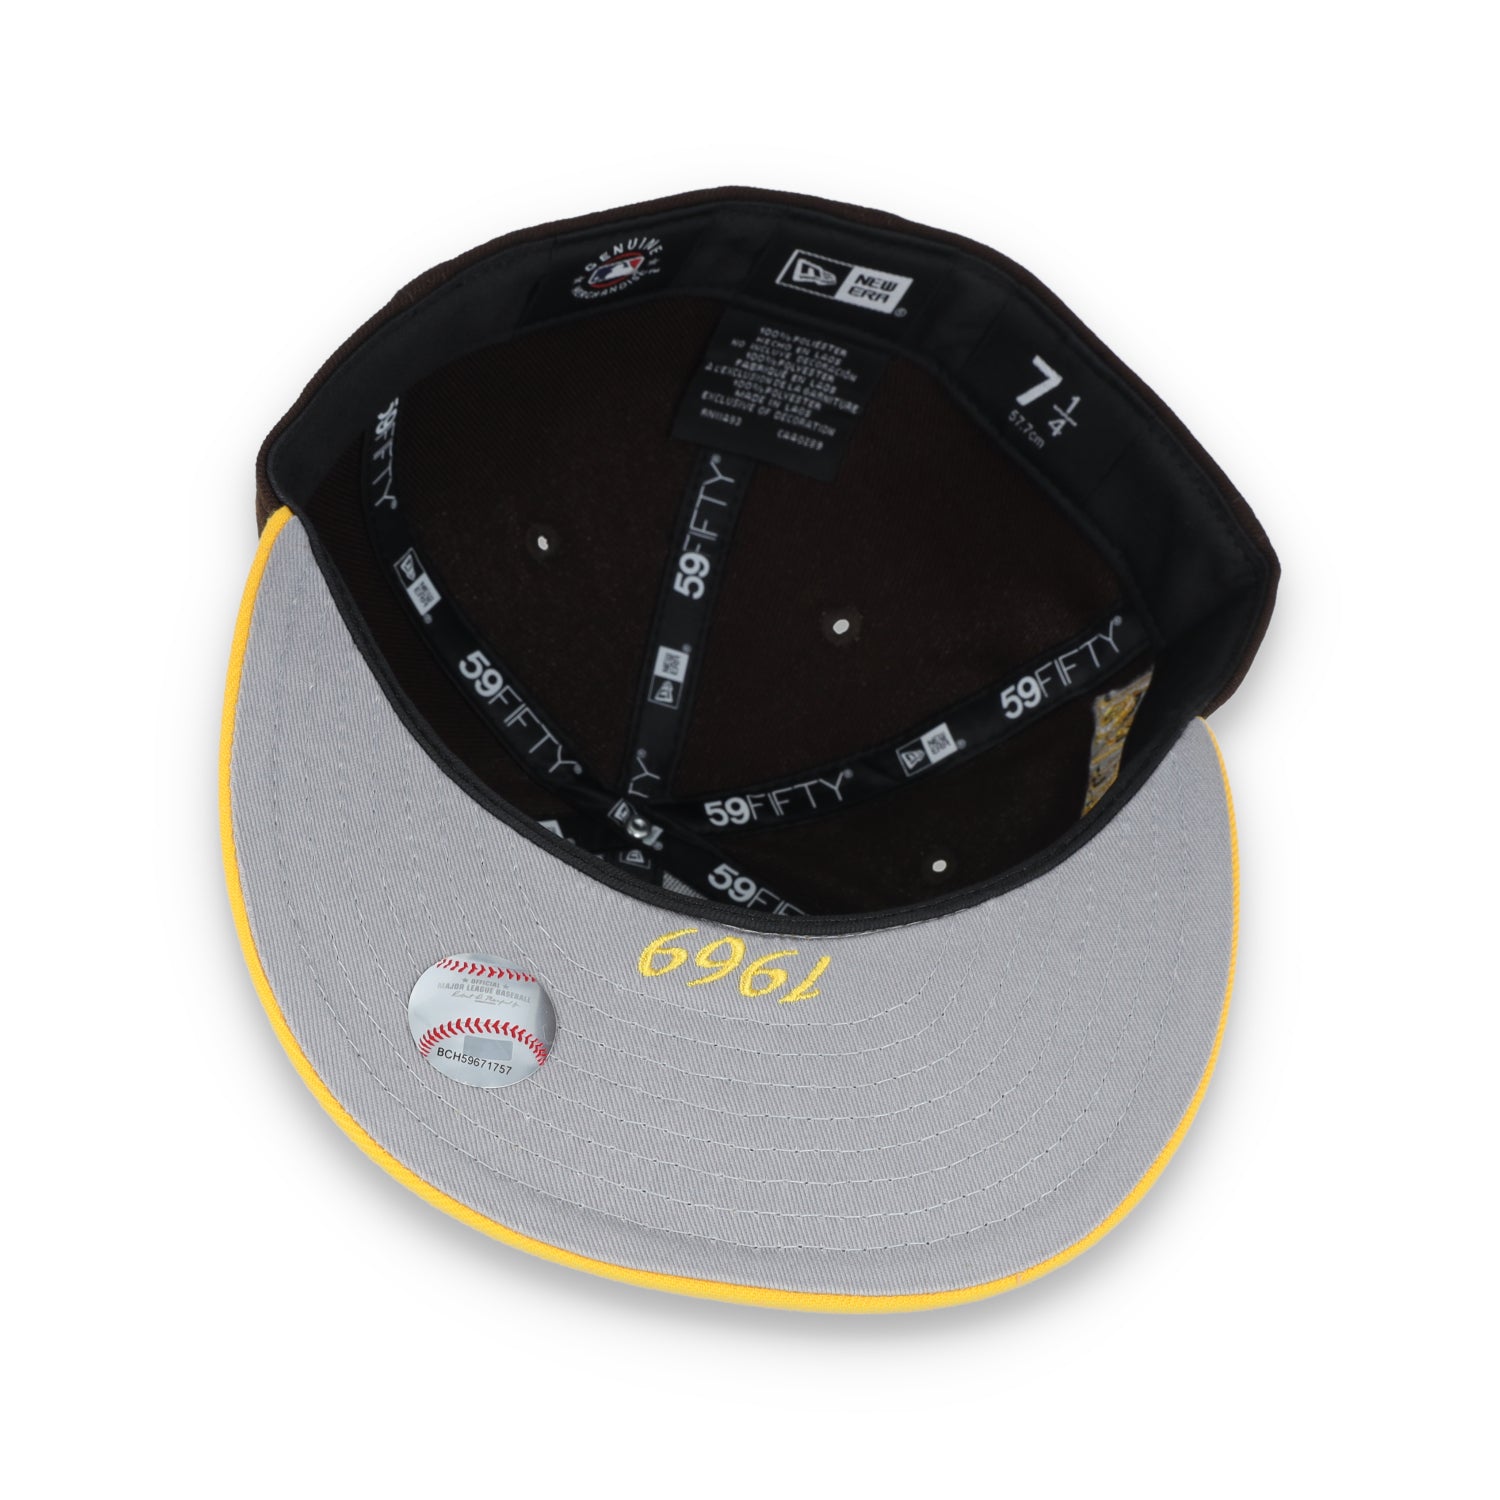 New Era San Diego Padres NL West 59FIFTY Fitted Hat-Brown/Yellow